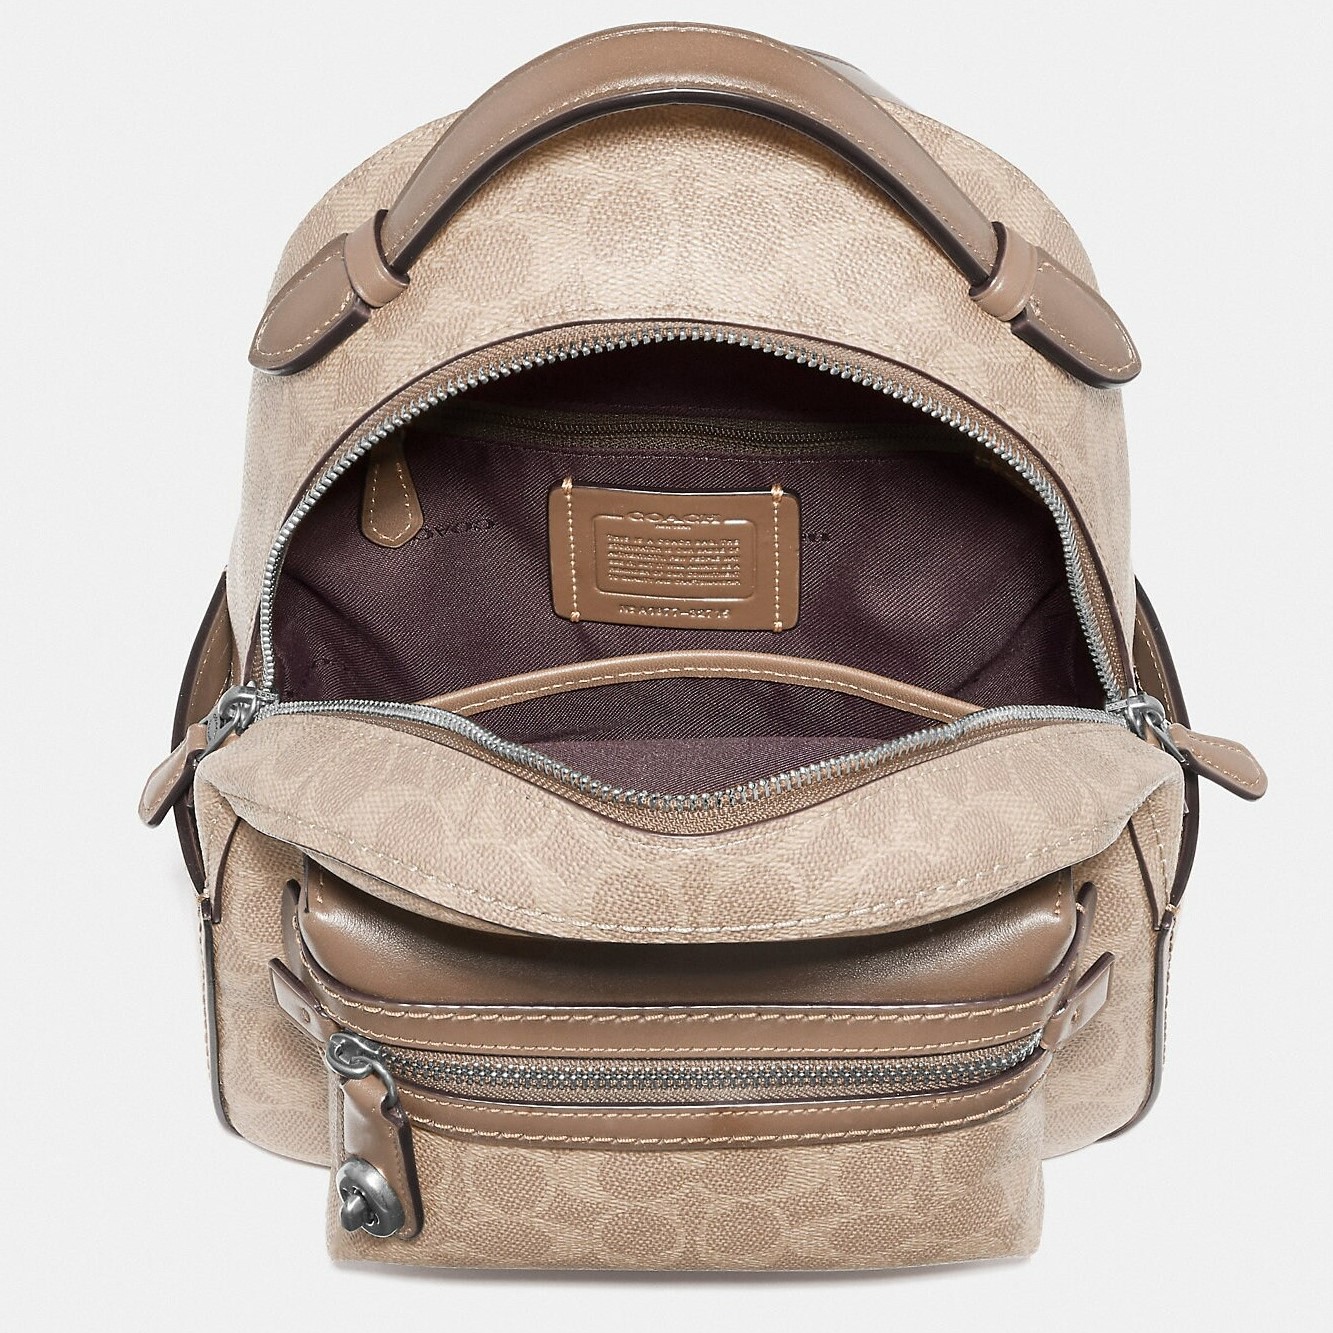 BALO COACH NỮ KÈM KHÓA XOAY CAMPUS BACKPACK 23 IN SIGNATURE CANVAS 2